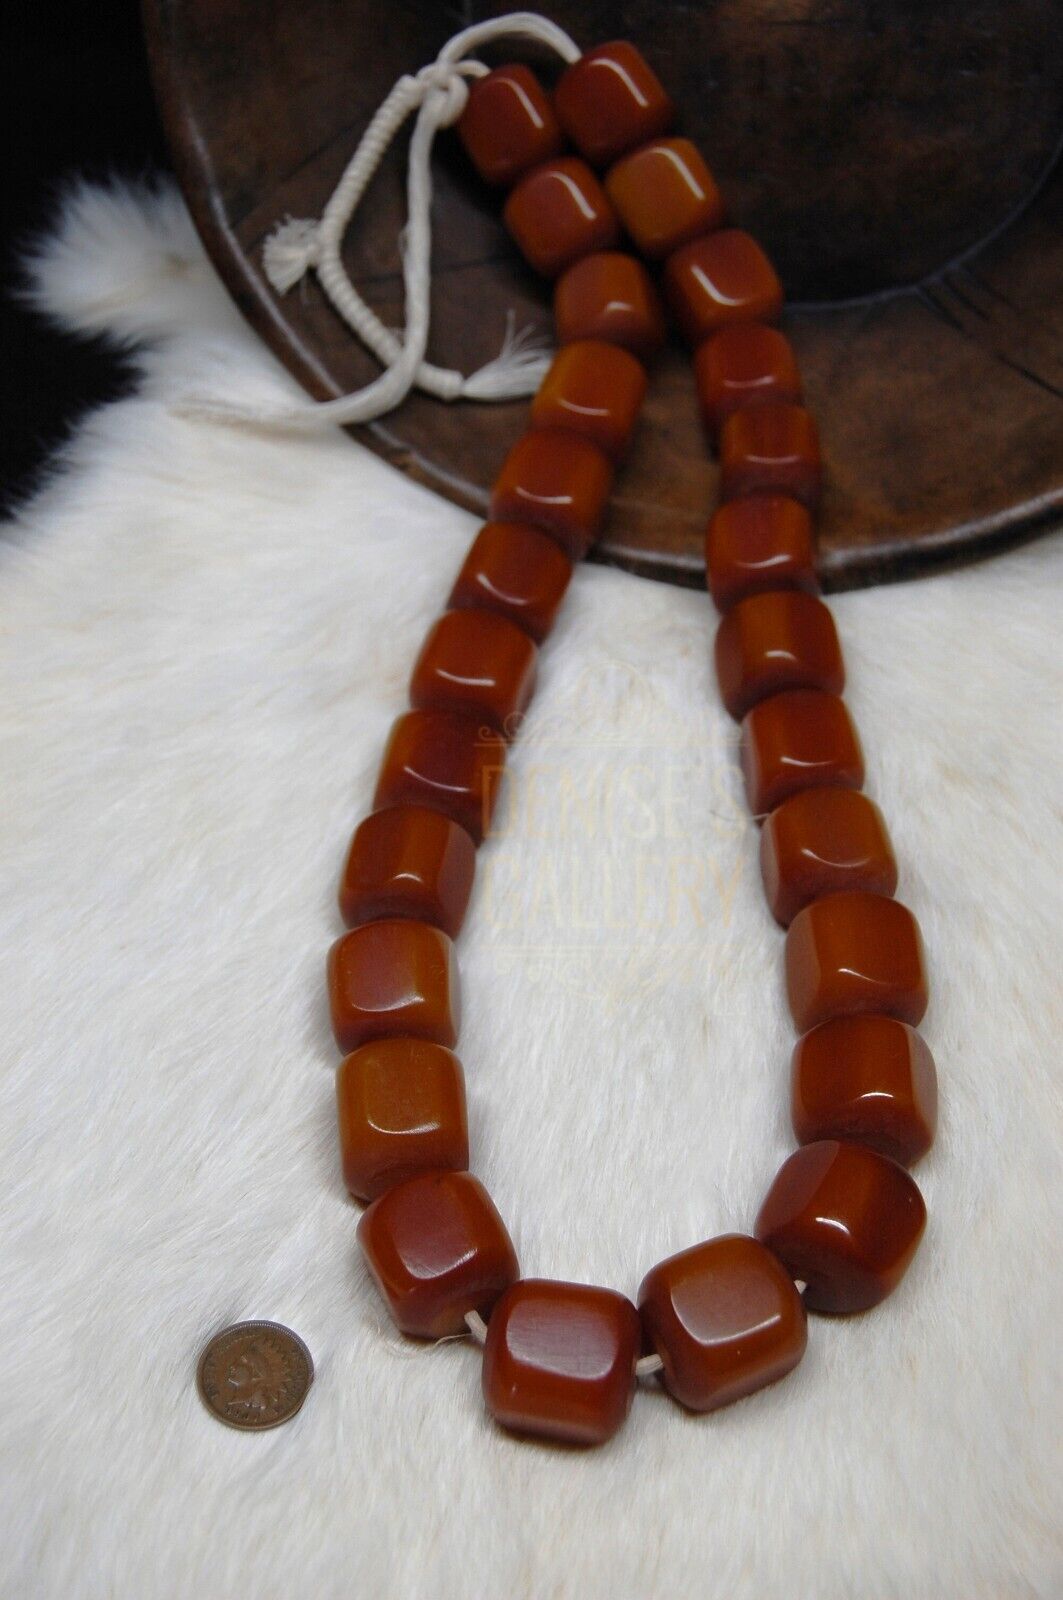 RARE & UNIQUE Cubed Simulated AMBER TRADE BEADS ~ Sale is for One (1) Bead